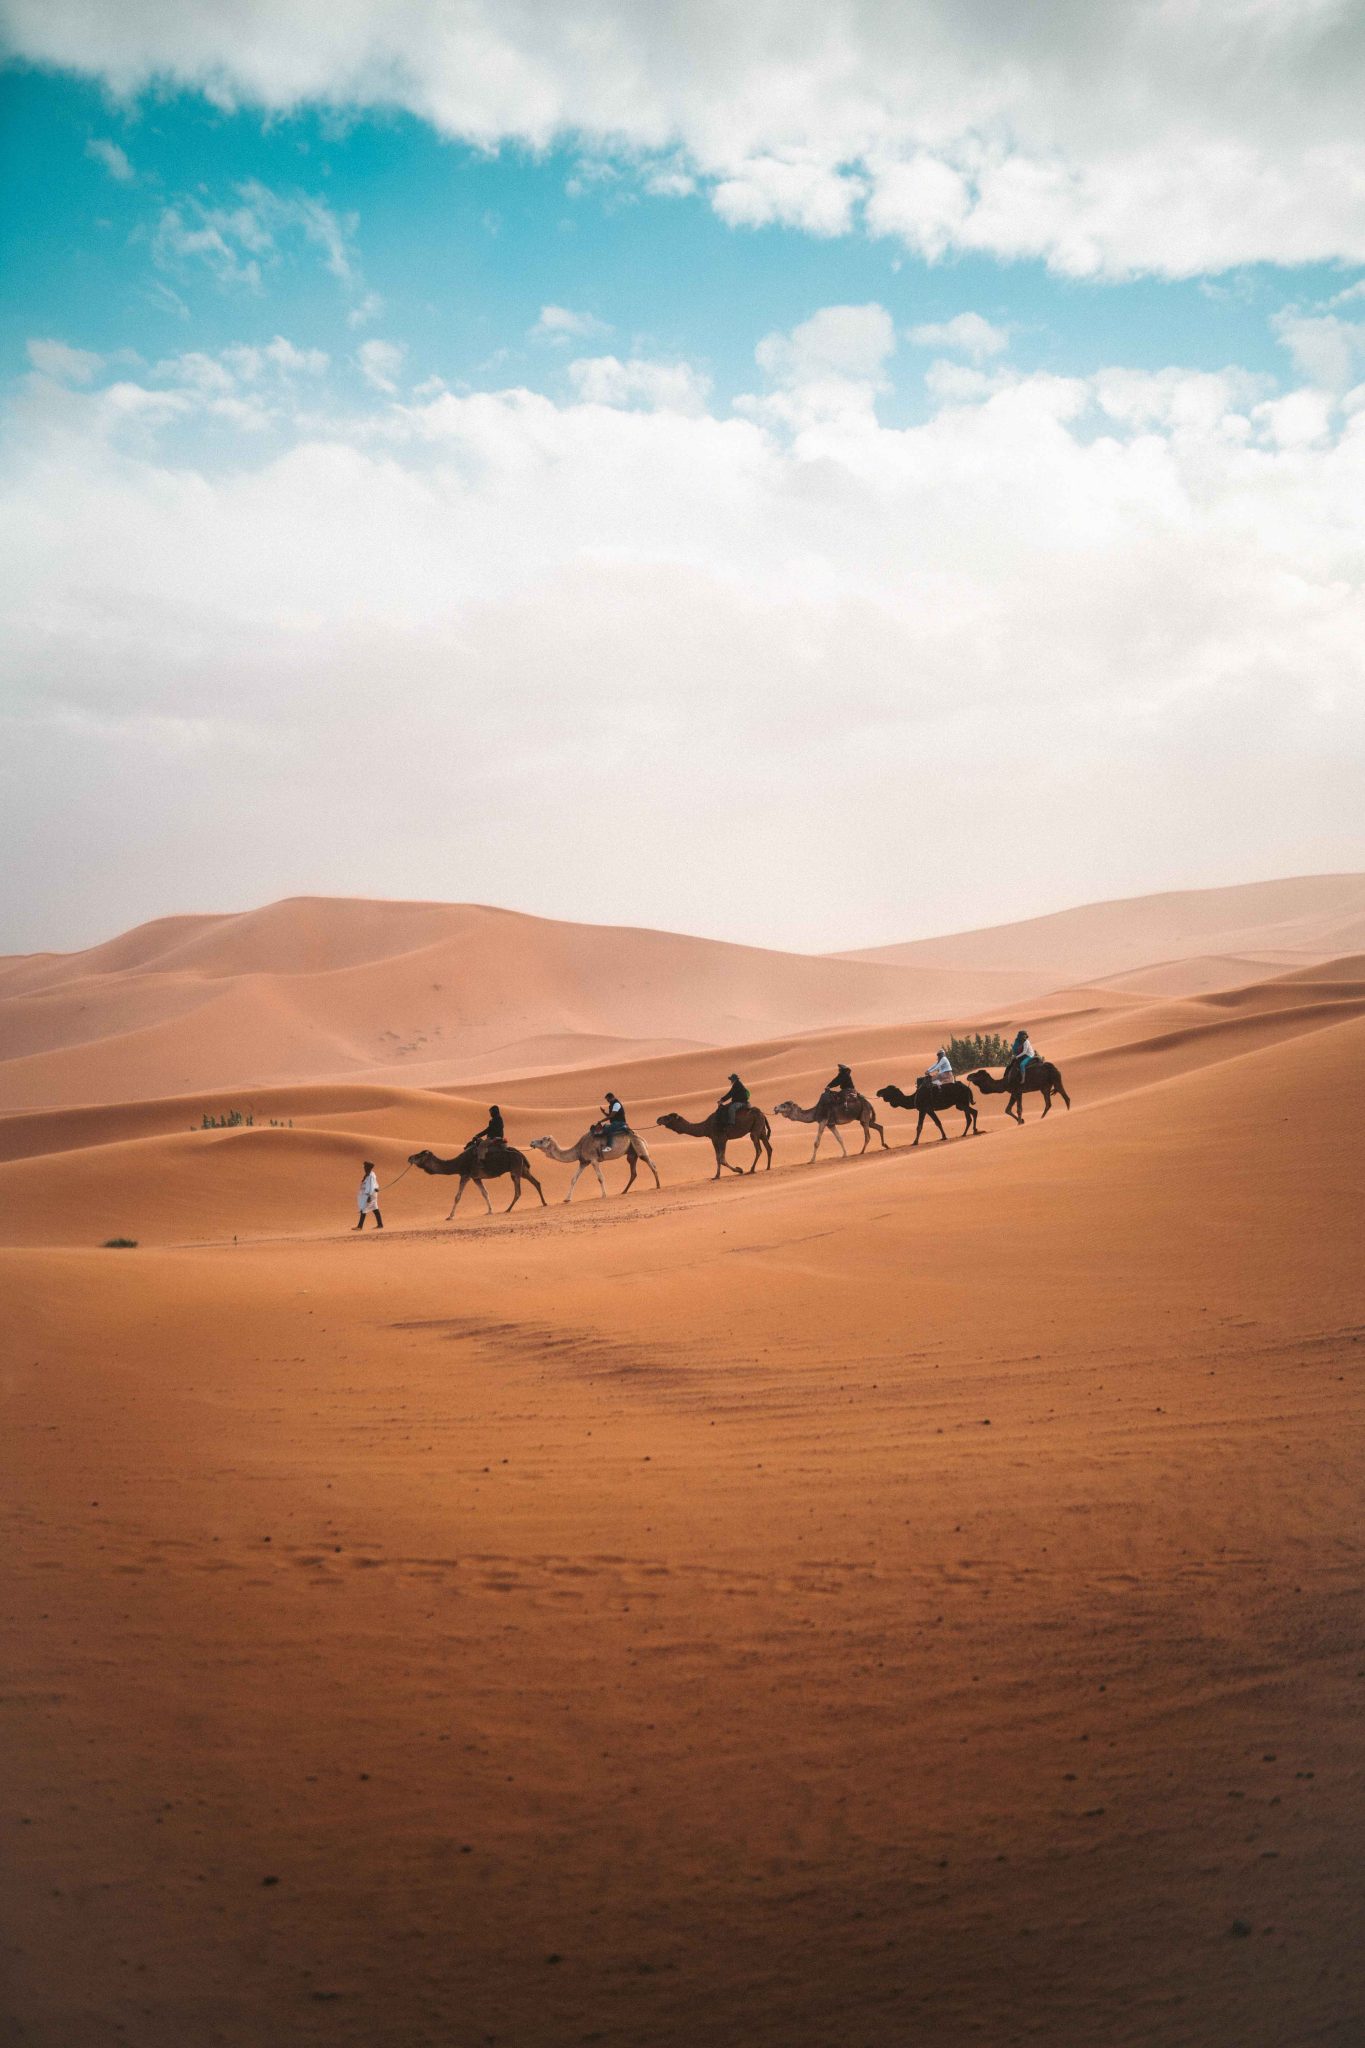 Crossing the dessert in Egypt by camel